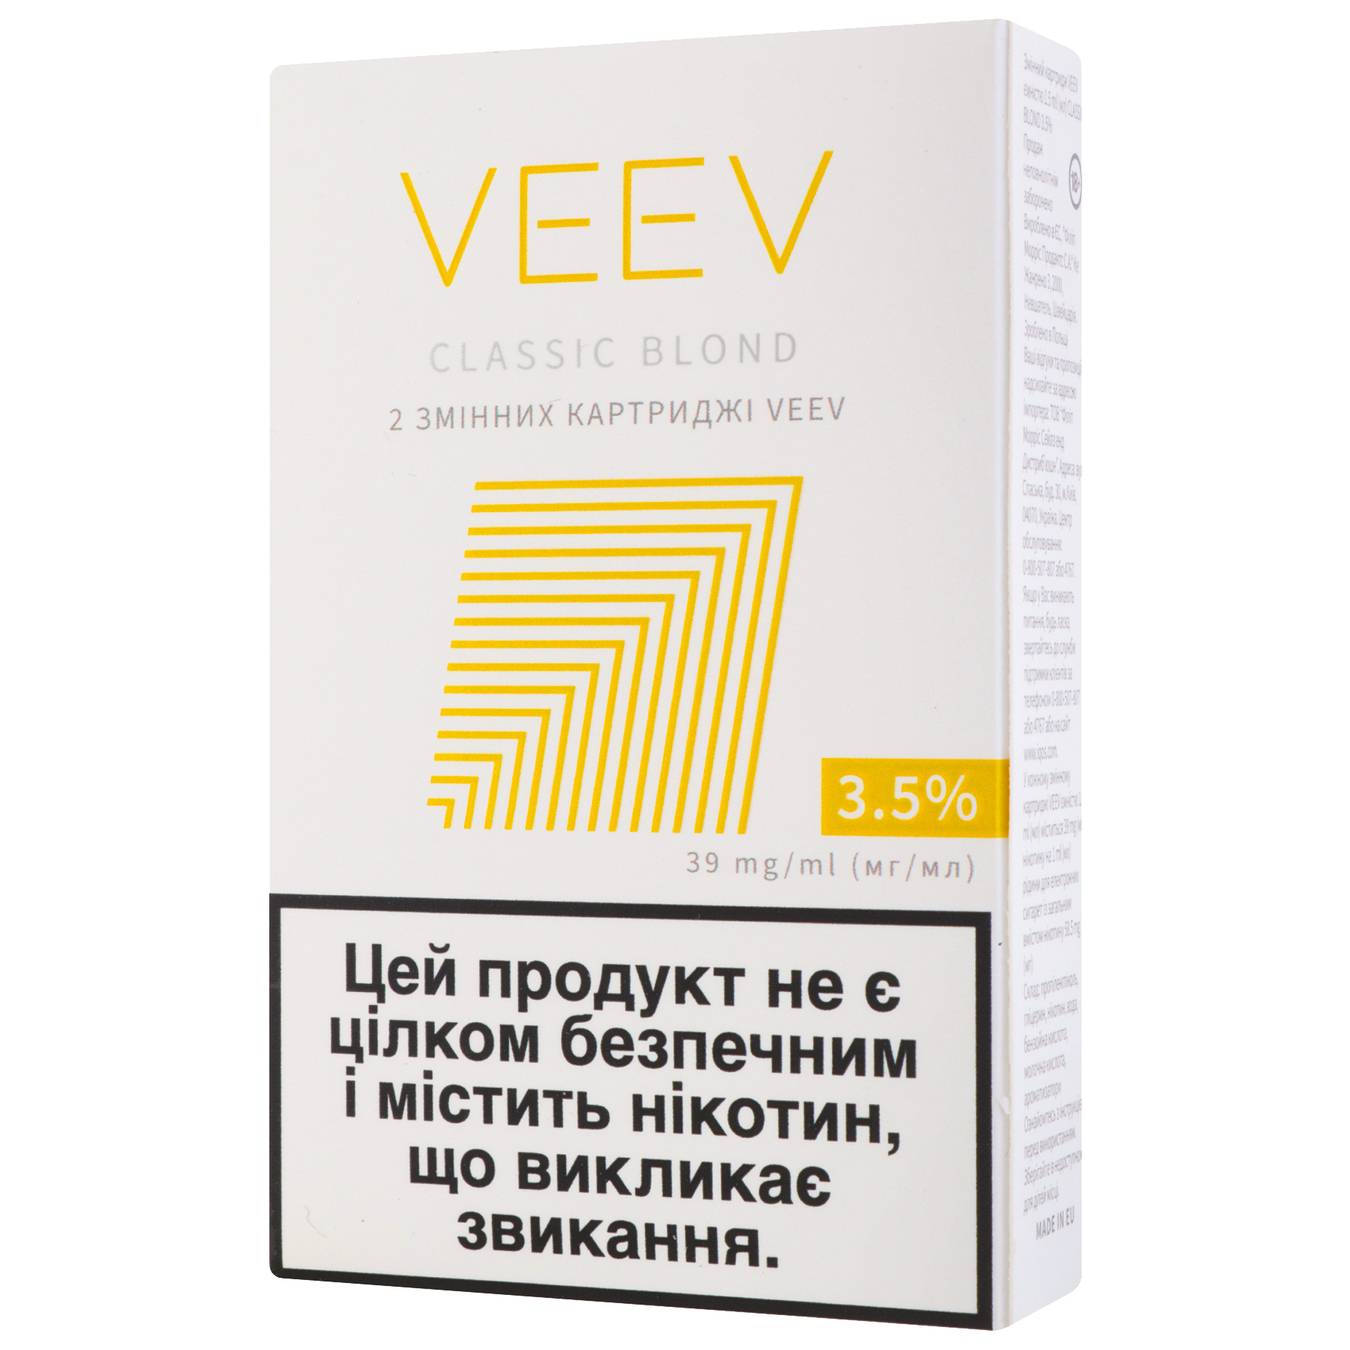 Replaceable cartridge Veev Classic Blond 3.5% (the price is without excise duty) 3